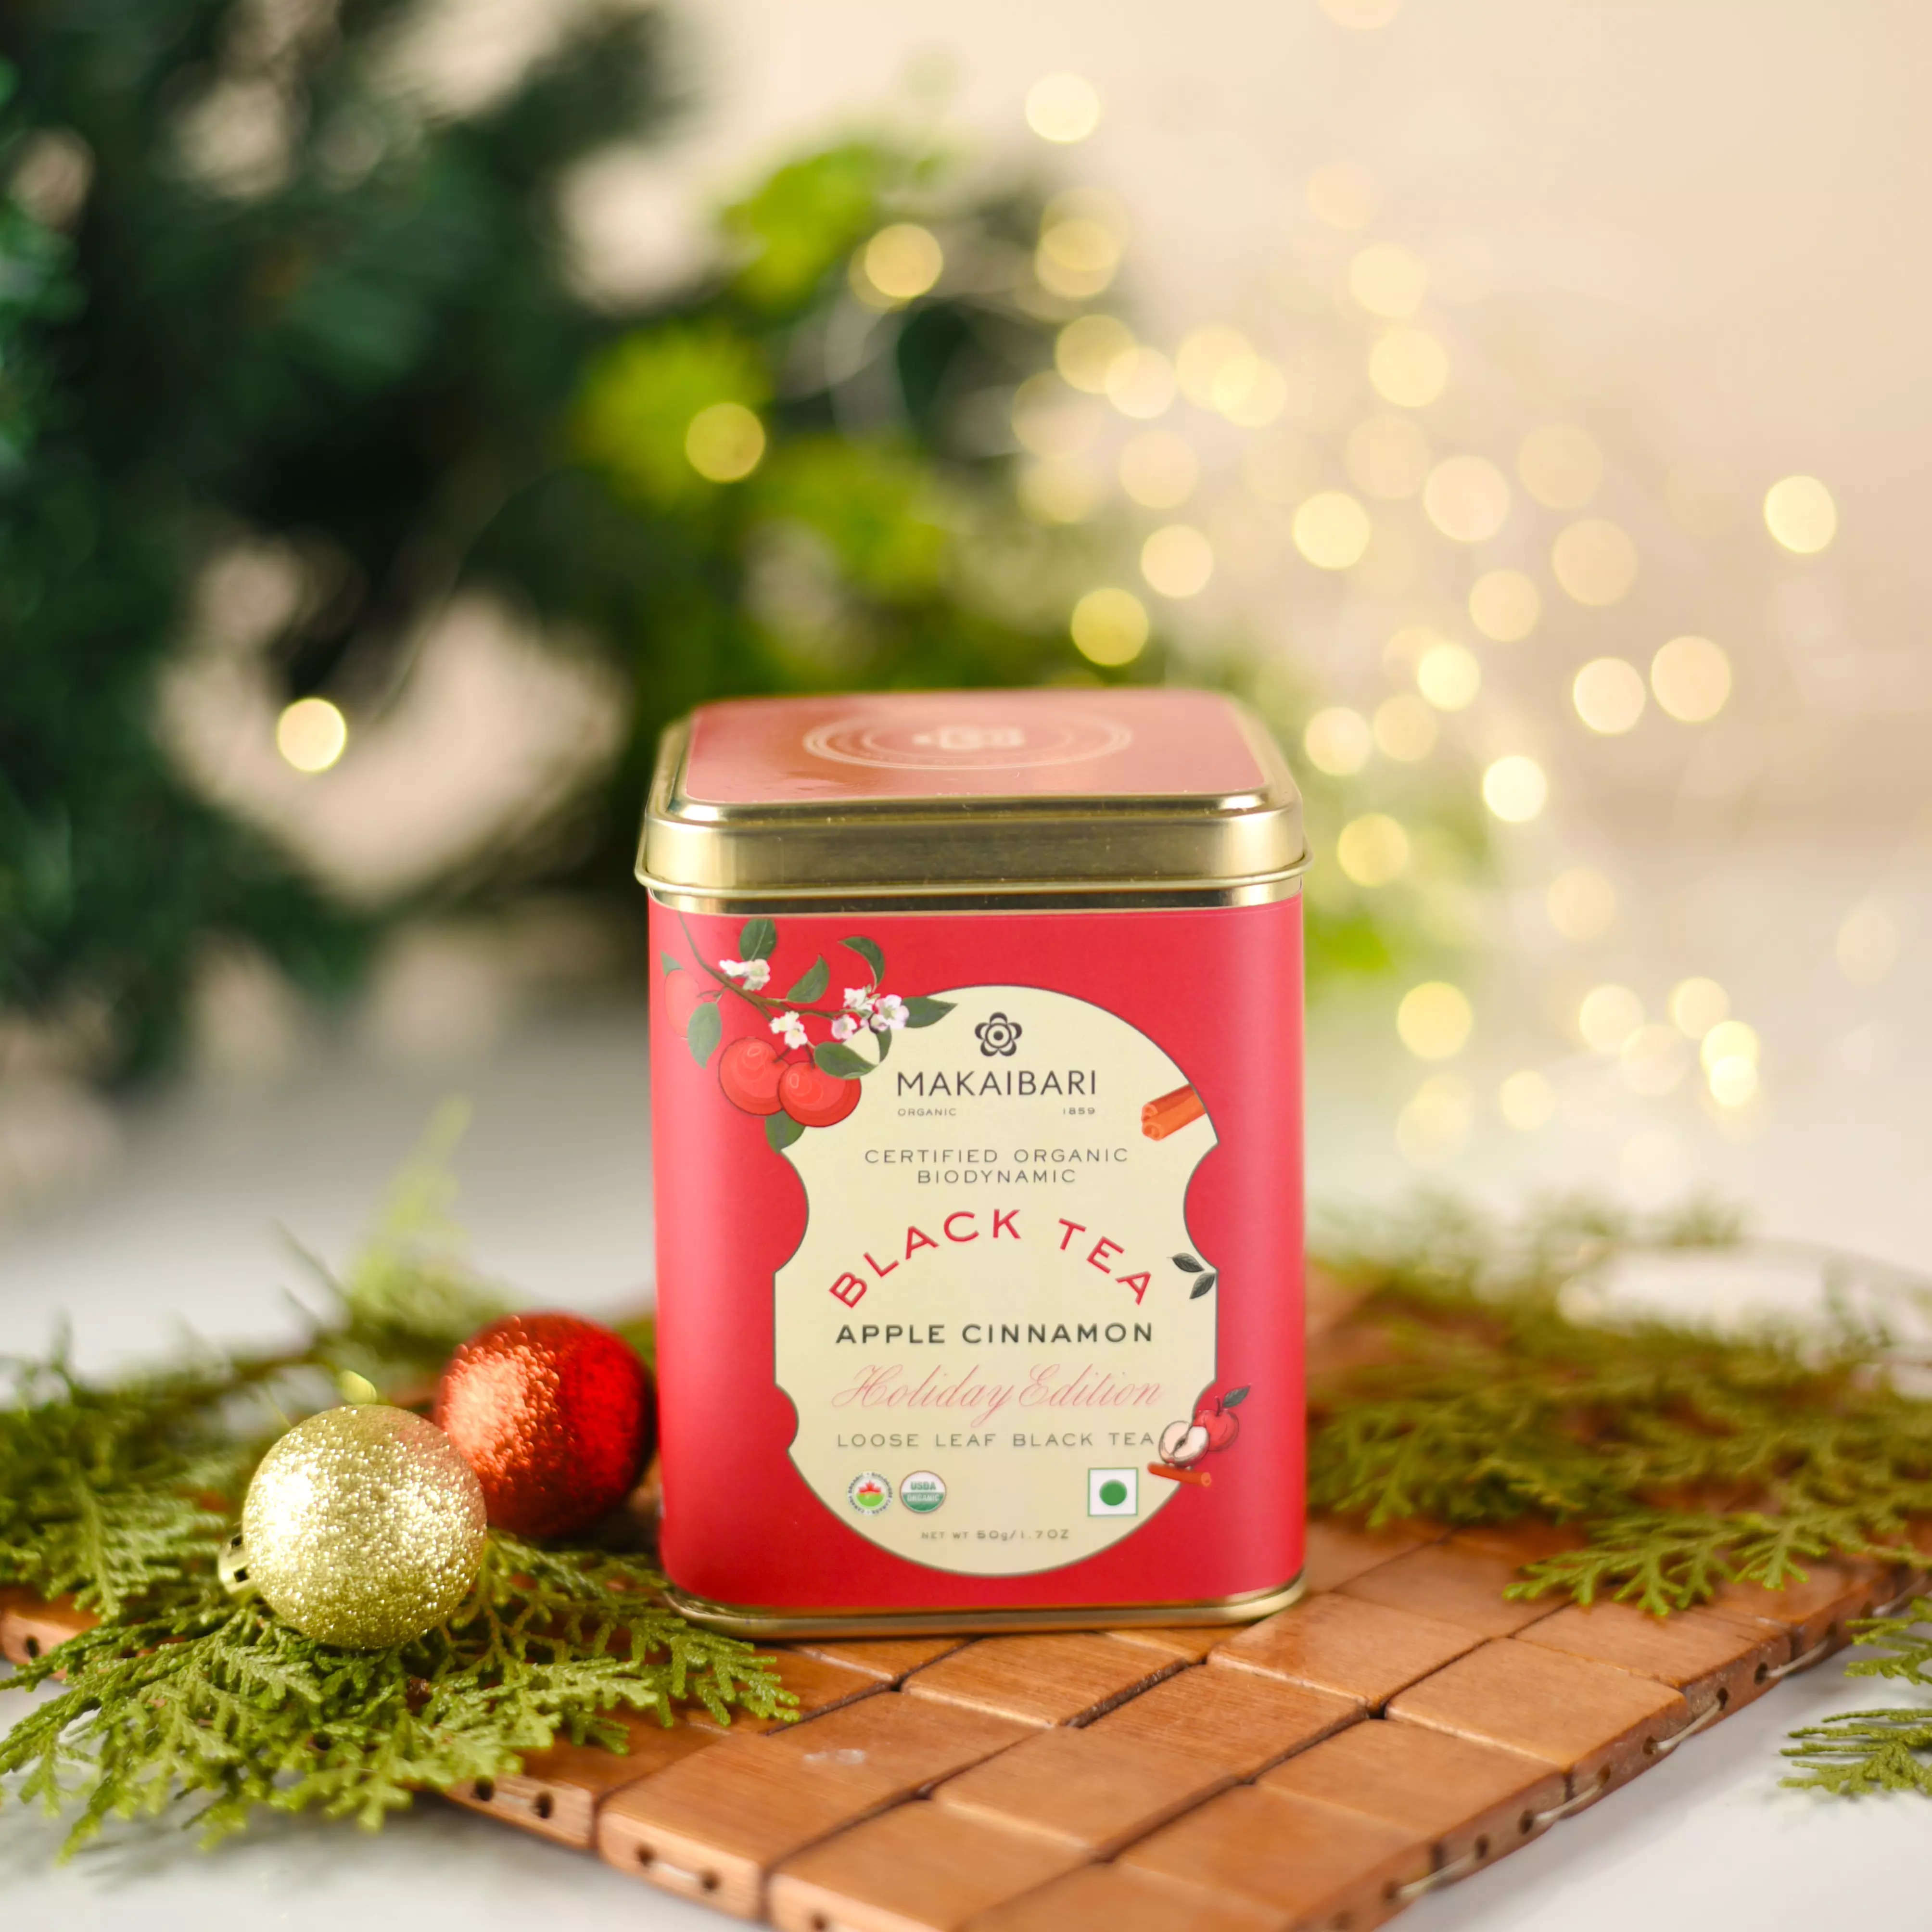 6 Healthy Christmas Gift Ideas | Giving the Gift of Health & Wellness for  the Holidays | NaturalTherapyPages.com.au